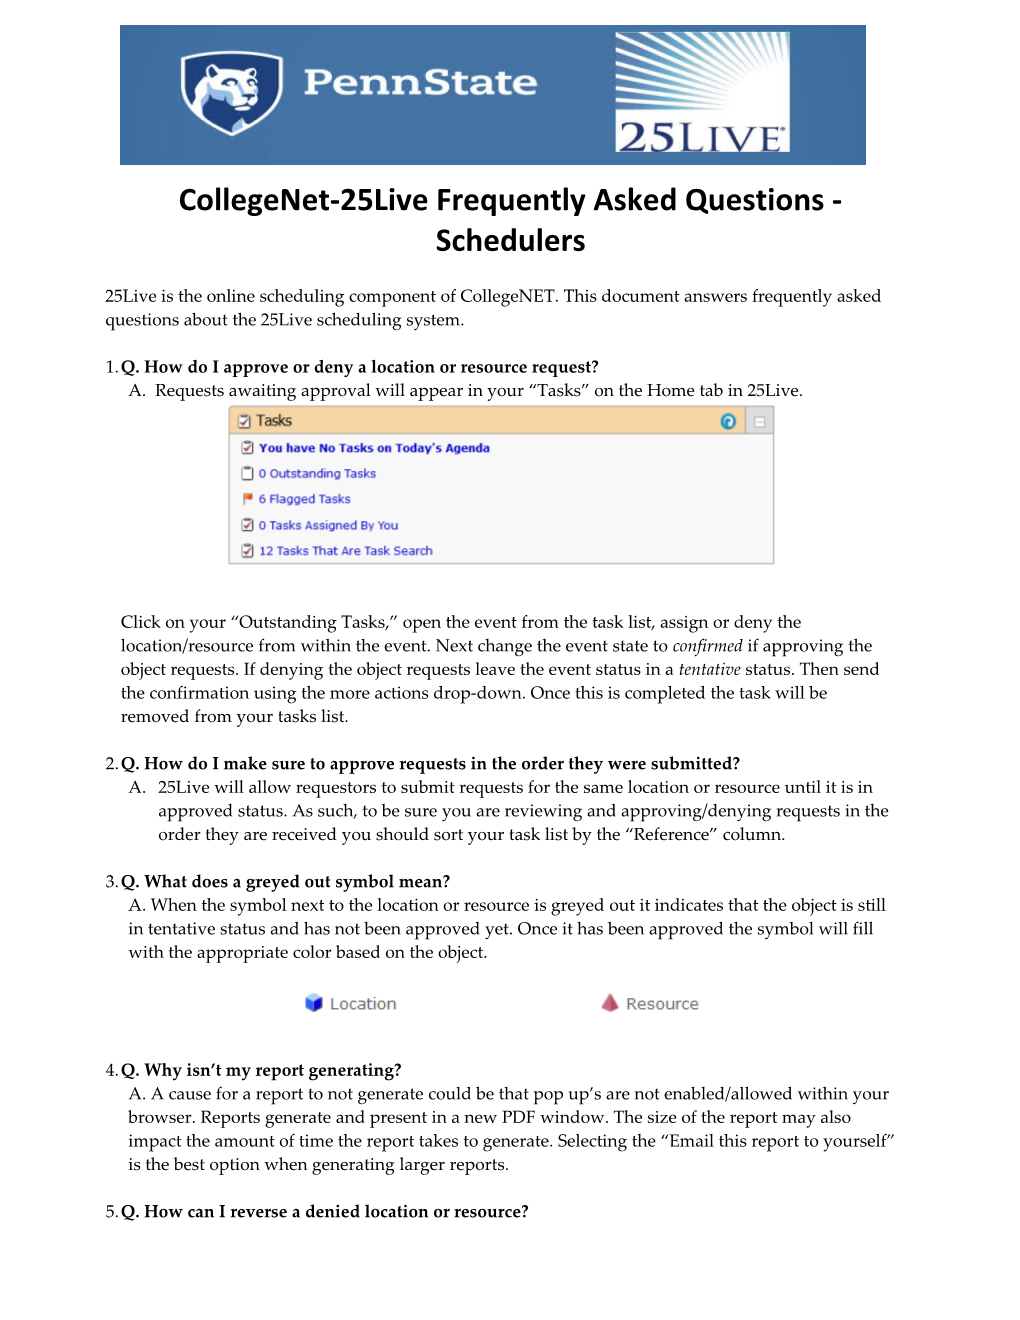 Collegenet-25Live Frequently Asked Questions - Schedulers